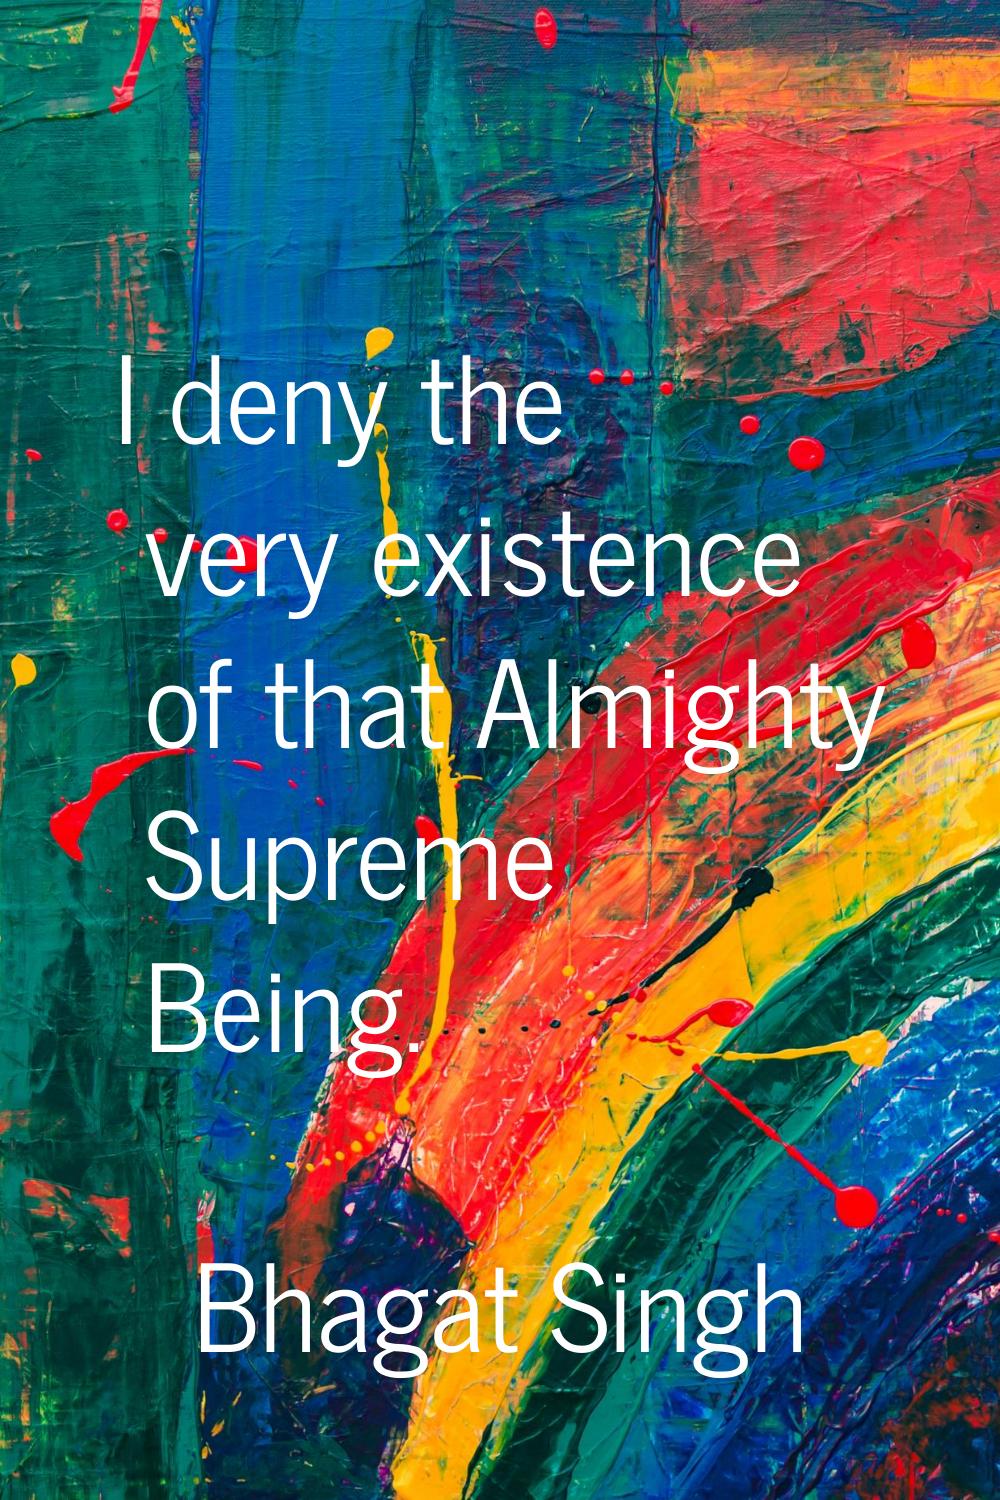 I deny the very existence of that Almighty Supreme Being.